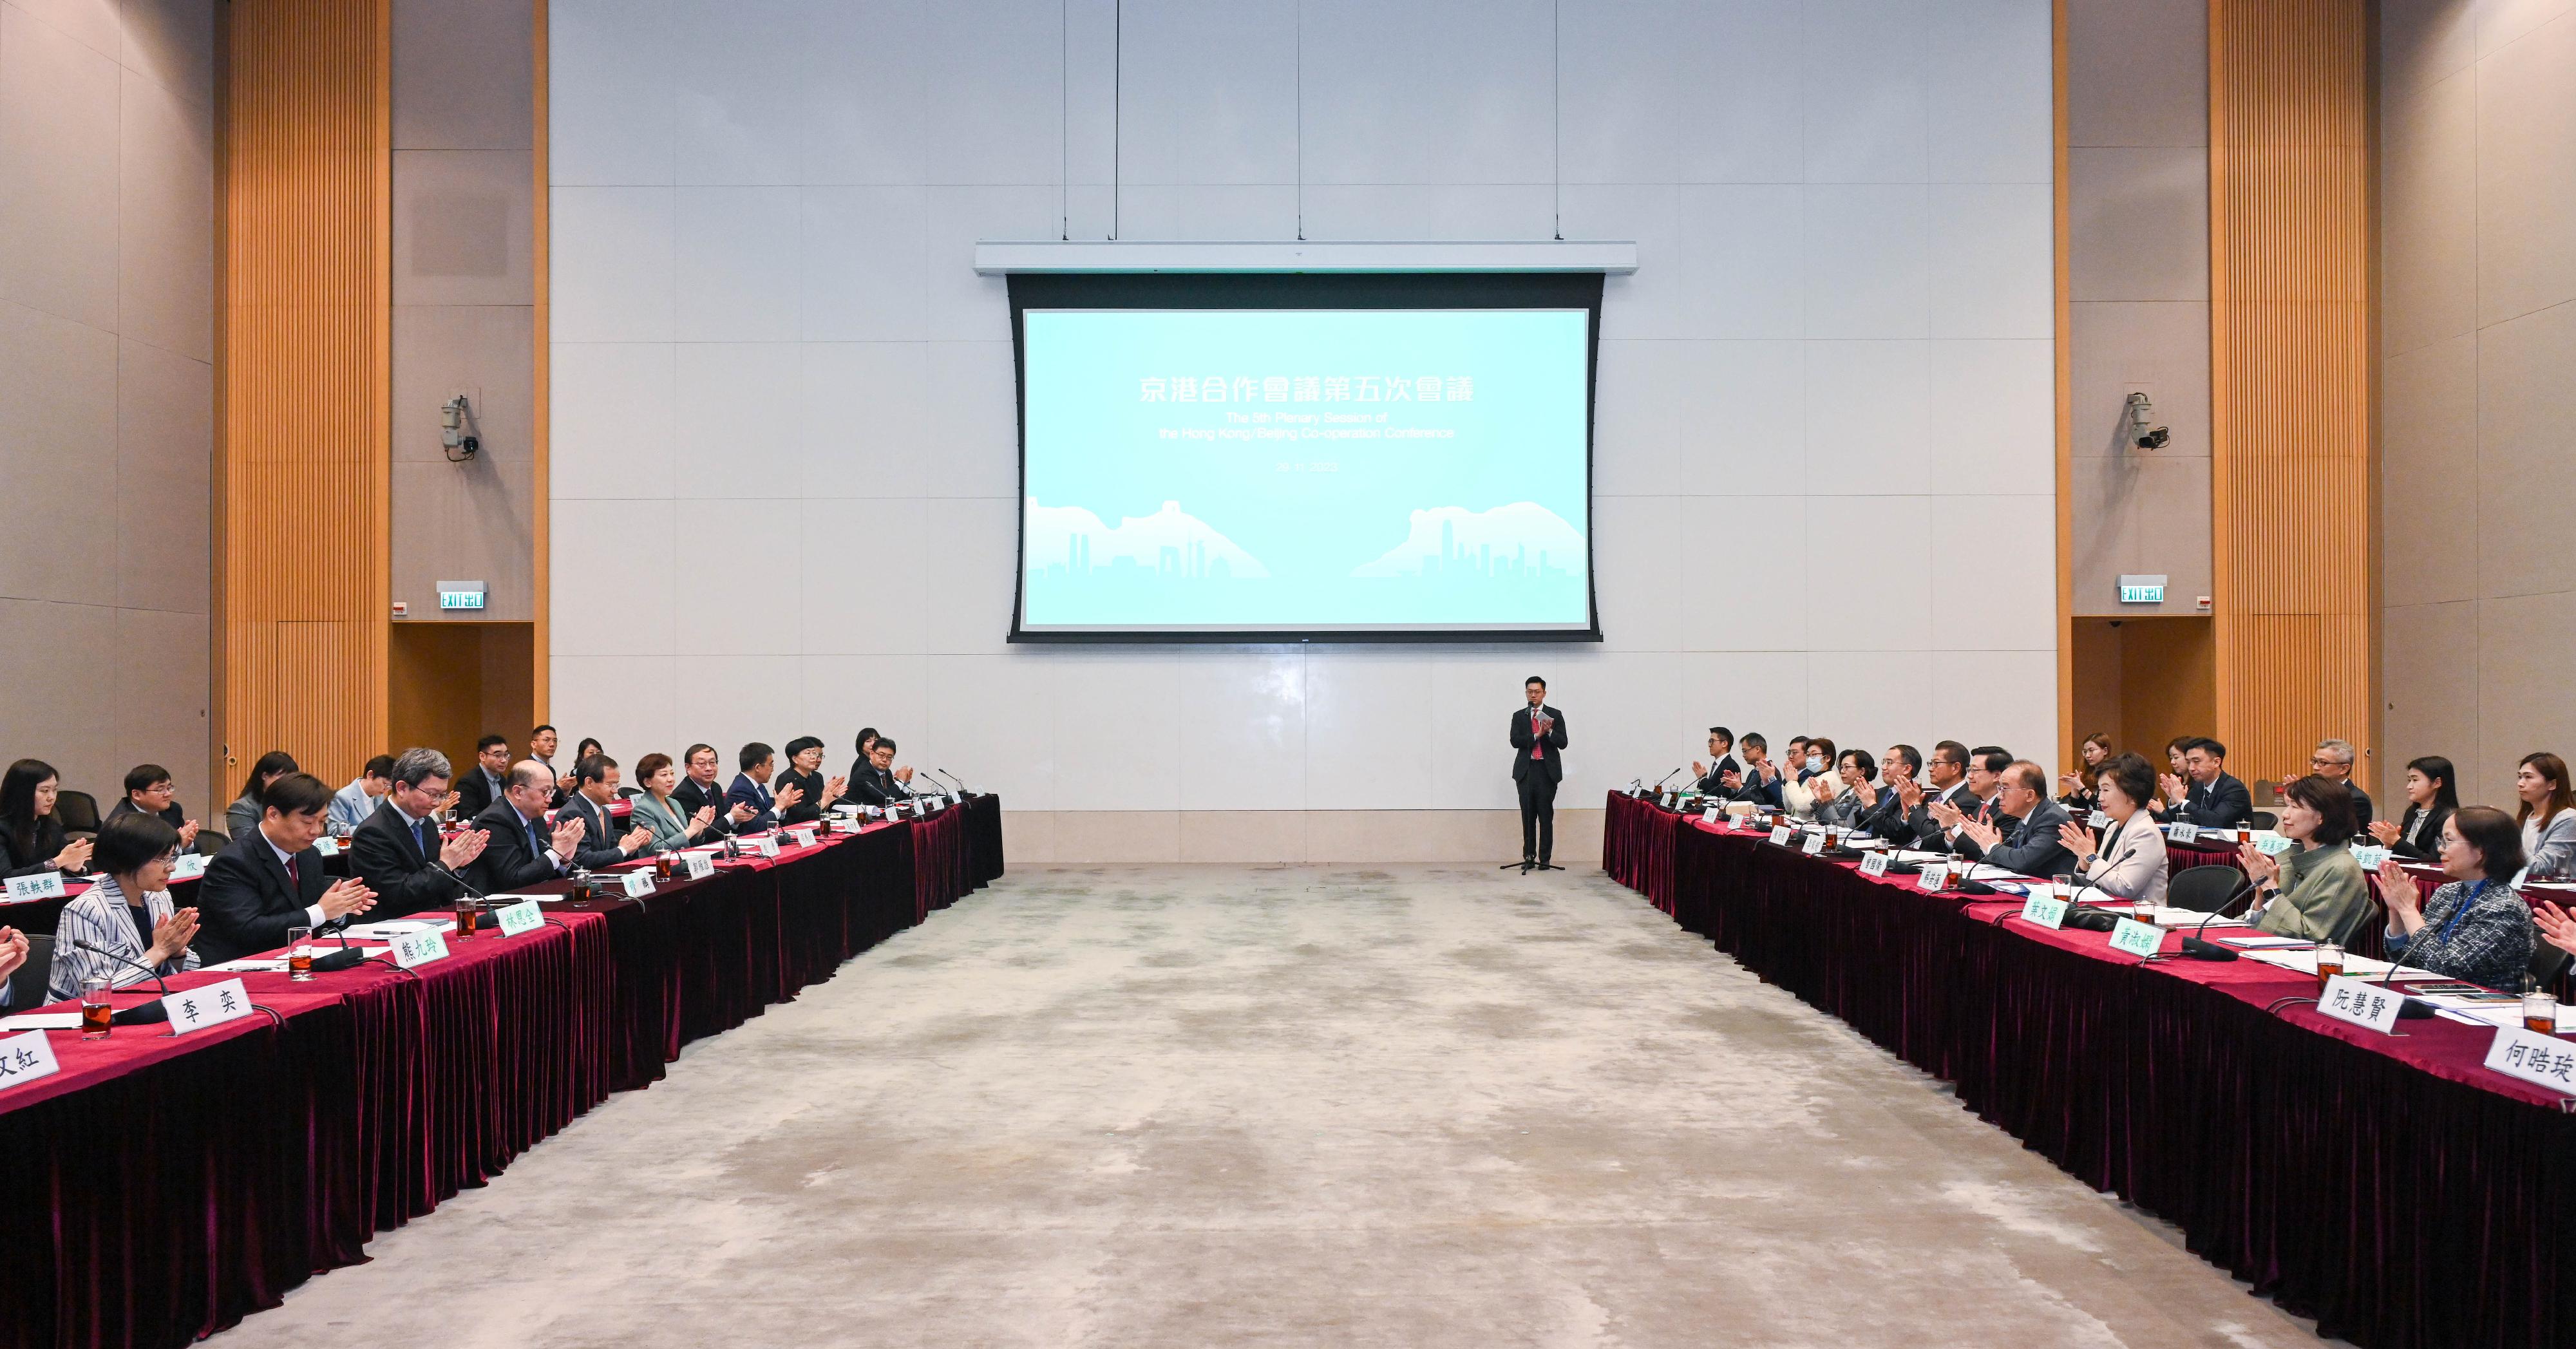 The Chief Executive, Mr John Lee, and the Mayor of Beijing, Mr Yin Yong, leading the delegations of the governments of Hong Kong Special Administrative Region and Beijing respectively, held the Fifth Plenary Session of the Hong Kong/Beijing Co-operation Conference in Hong Kong today (November 29).